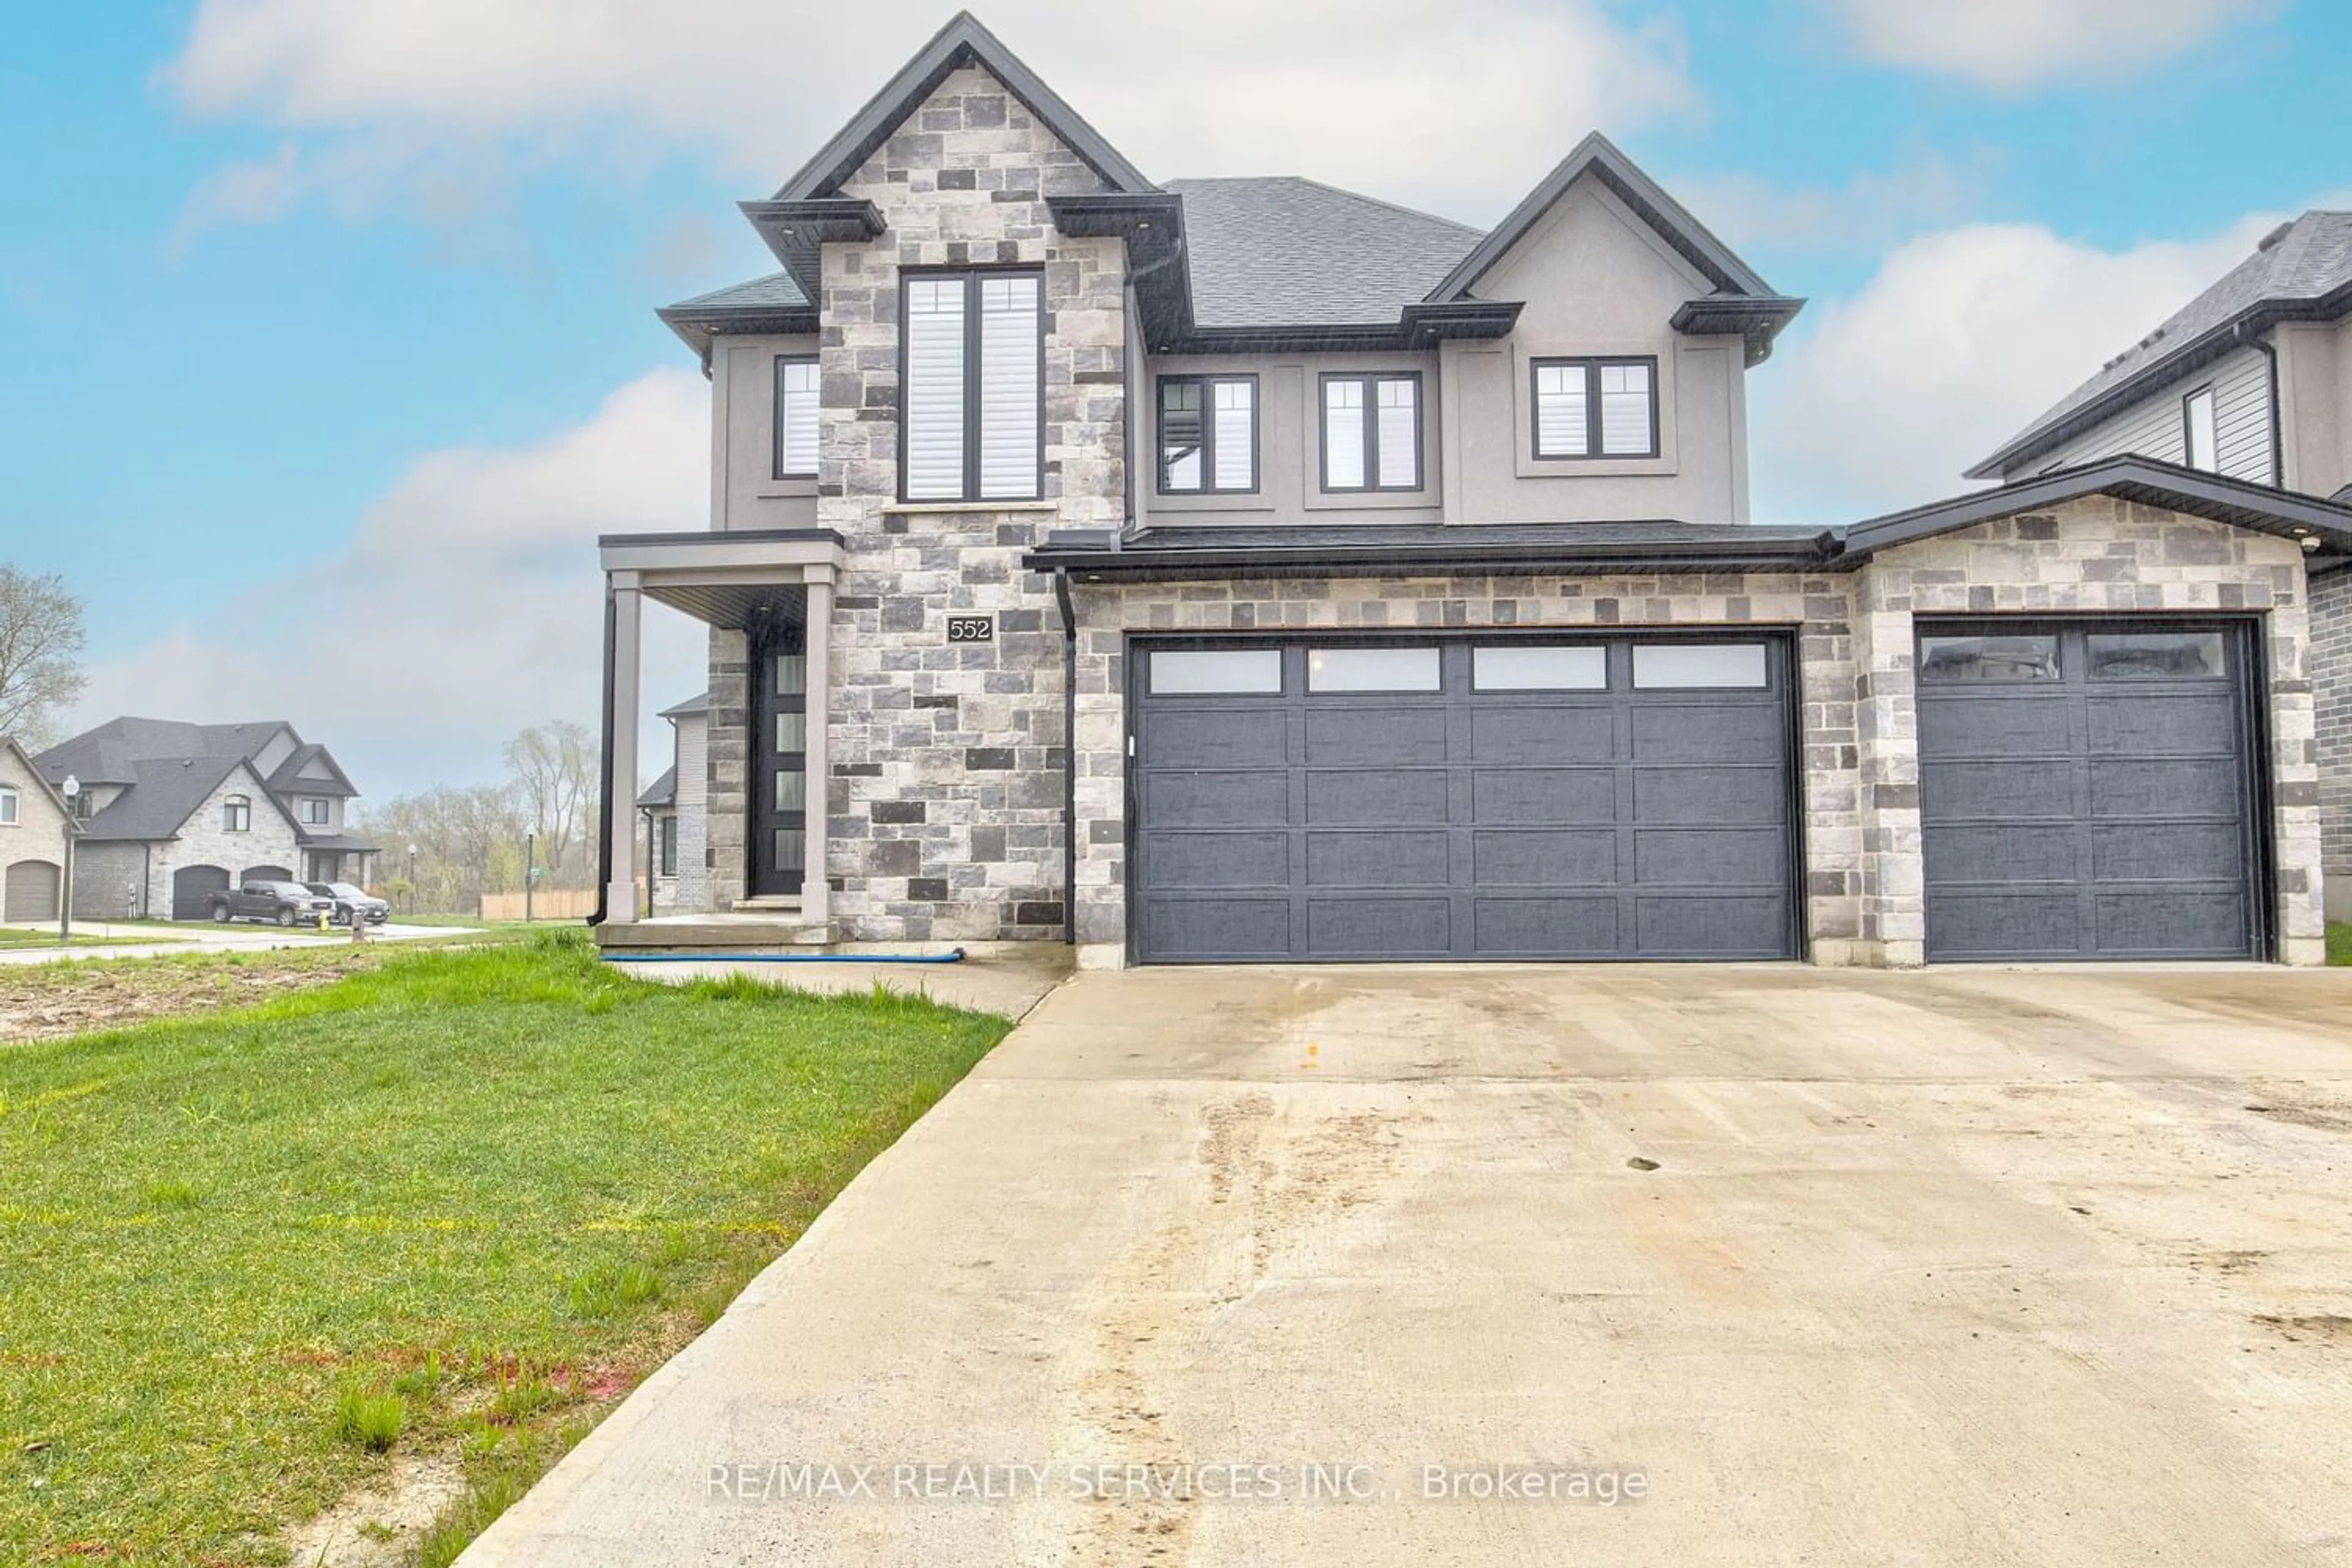 Home with brick exterior material for 552 Masters Dr, Woodstock Ontario N4T 0L2